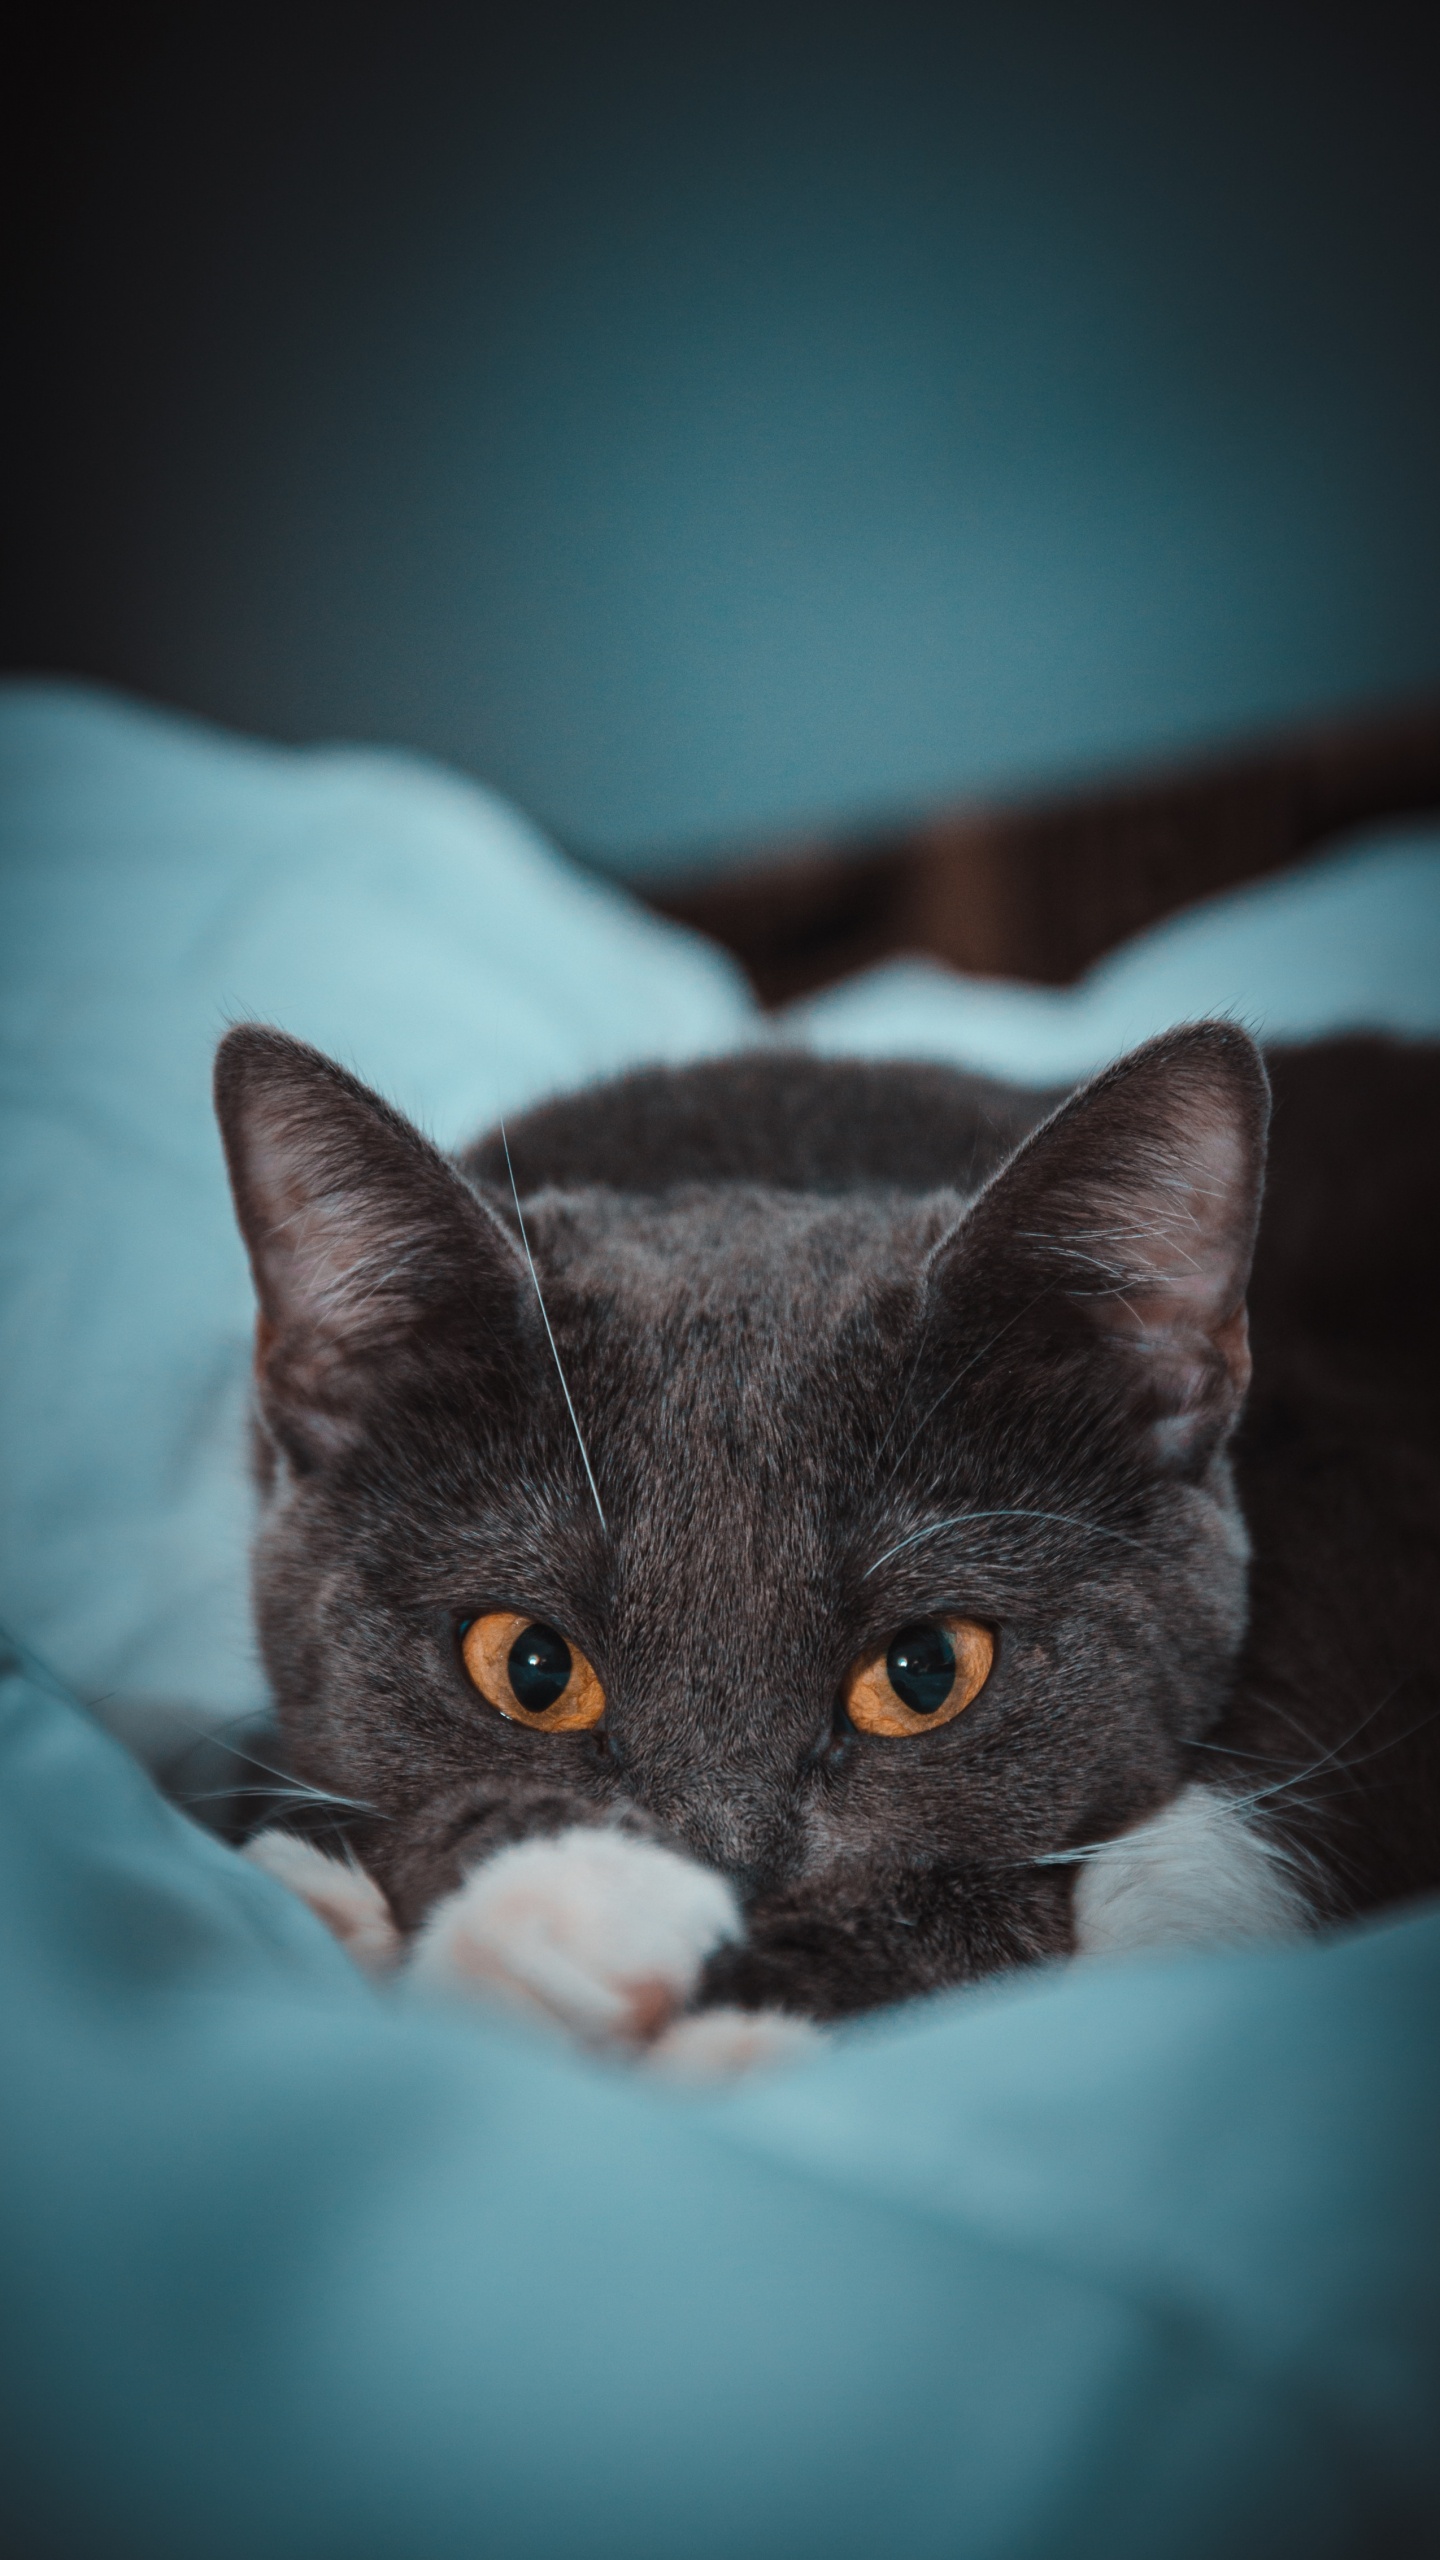 Black and White Cat on Teal Textile. Wallpaper in 1440x2560 Resolution